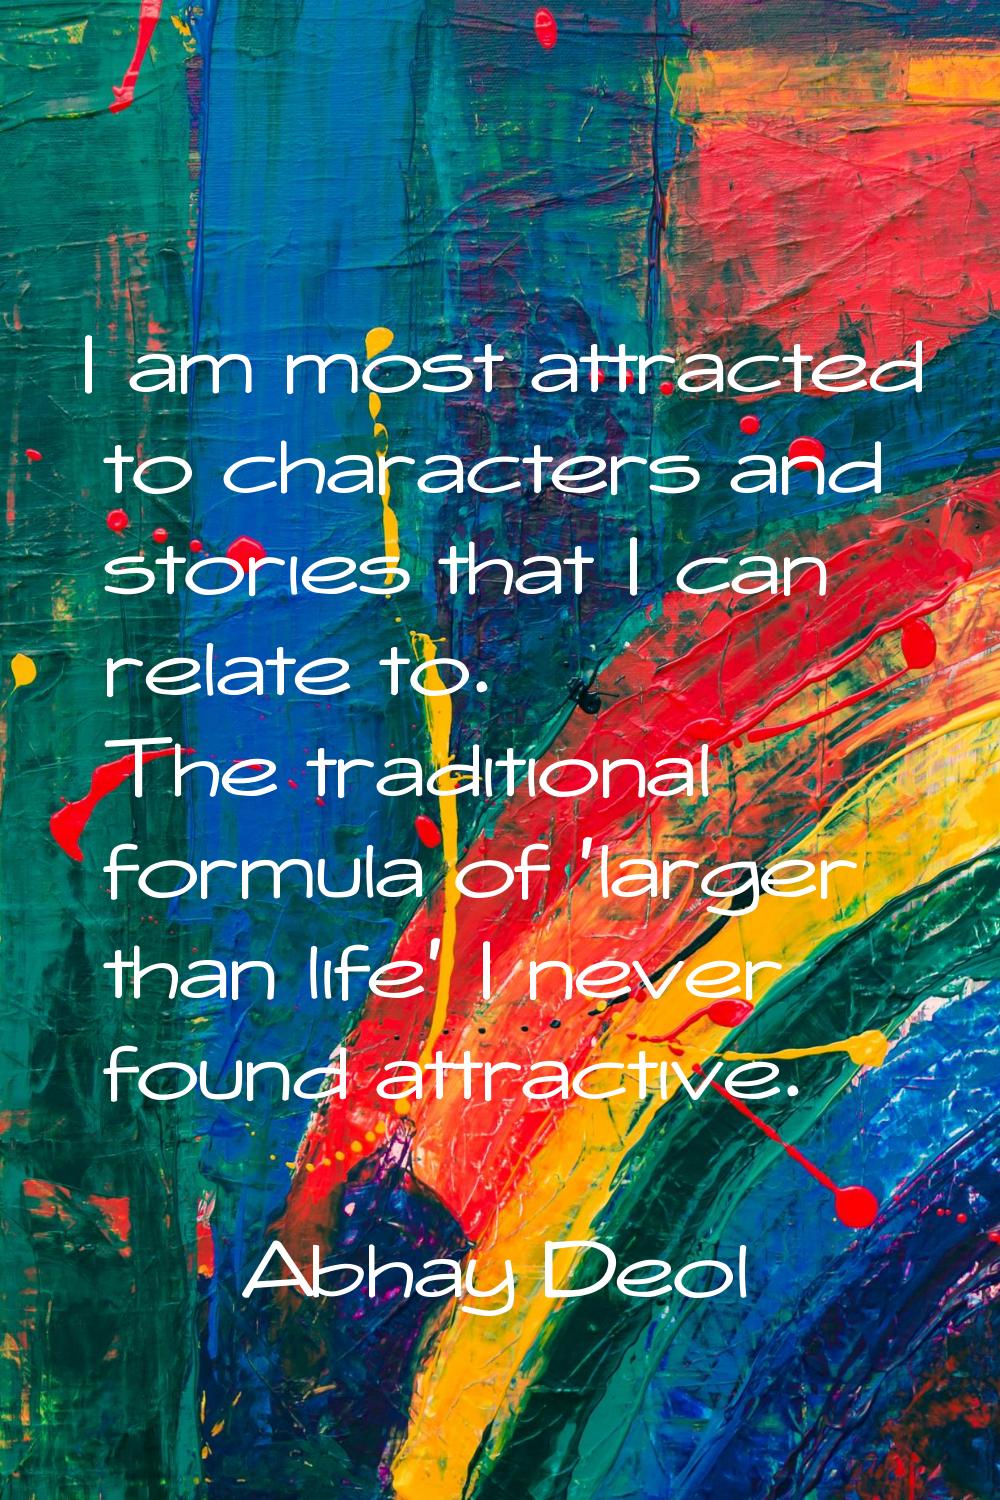 I am most attracted to characters and stories that I can relate to. The traditional formula of 'lar